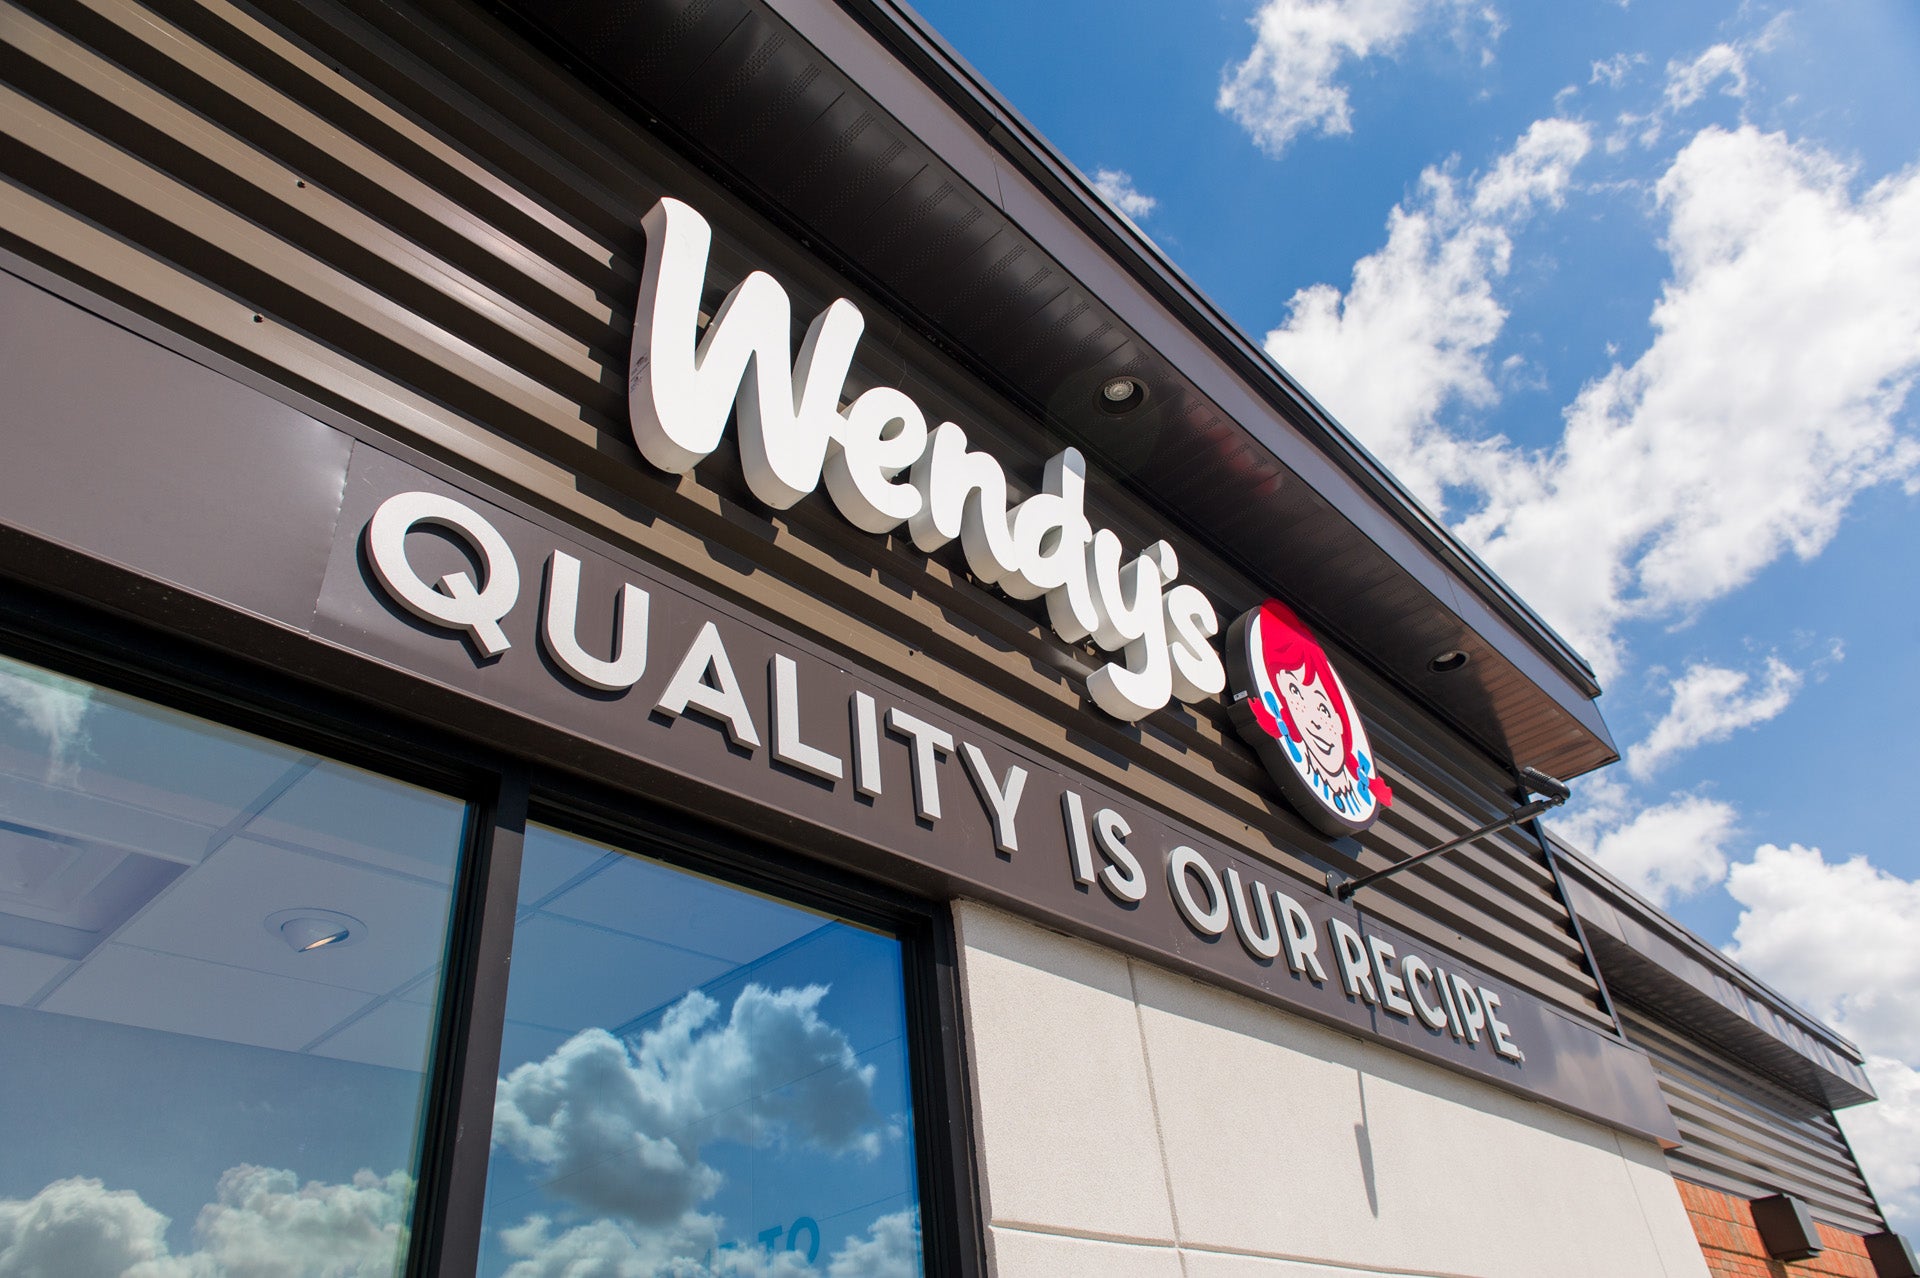 Wendy's Q3 2018 results